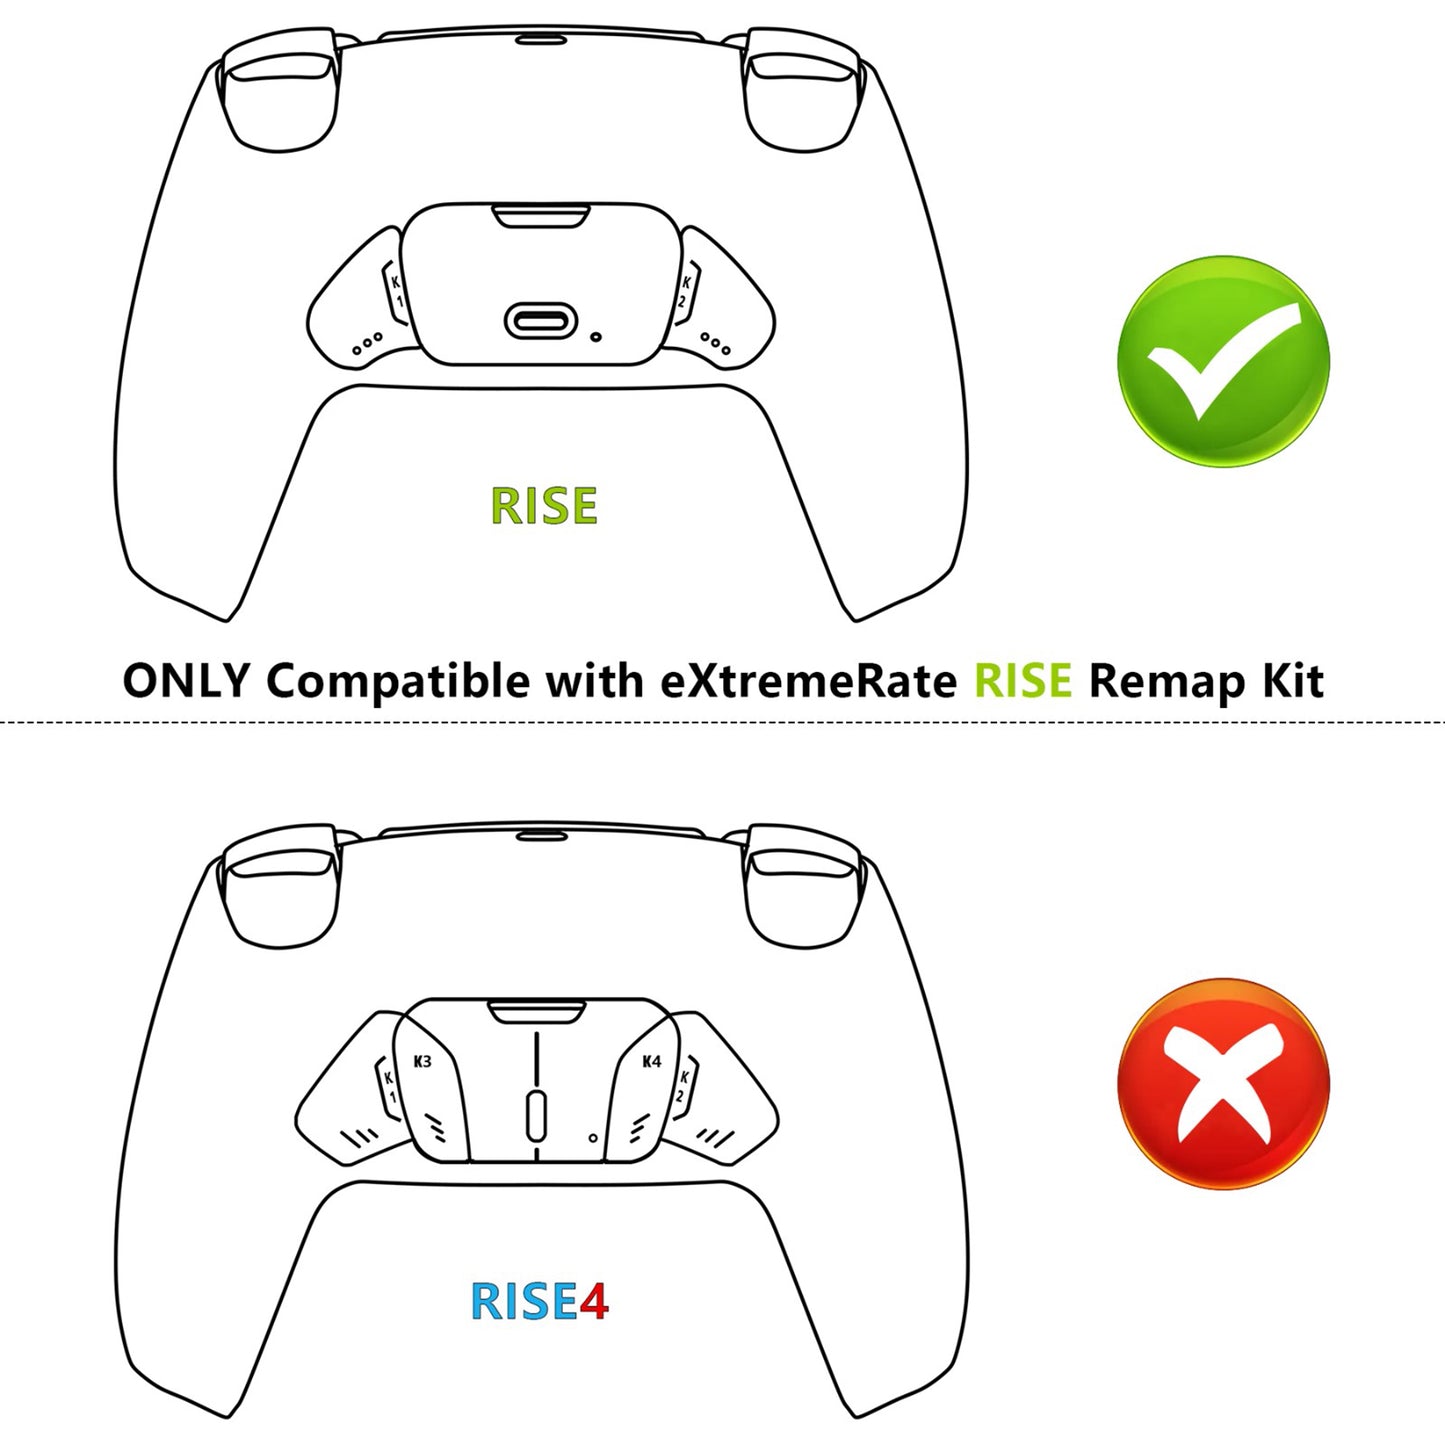 eXtremeRate Replacement Redesigned K1 K2 Back Buttons for eXtremerate RISE Remap Kit, Compatible with PS5 Controller - Scarlet Red eXtremeRate